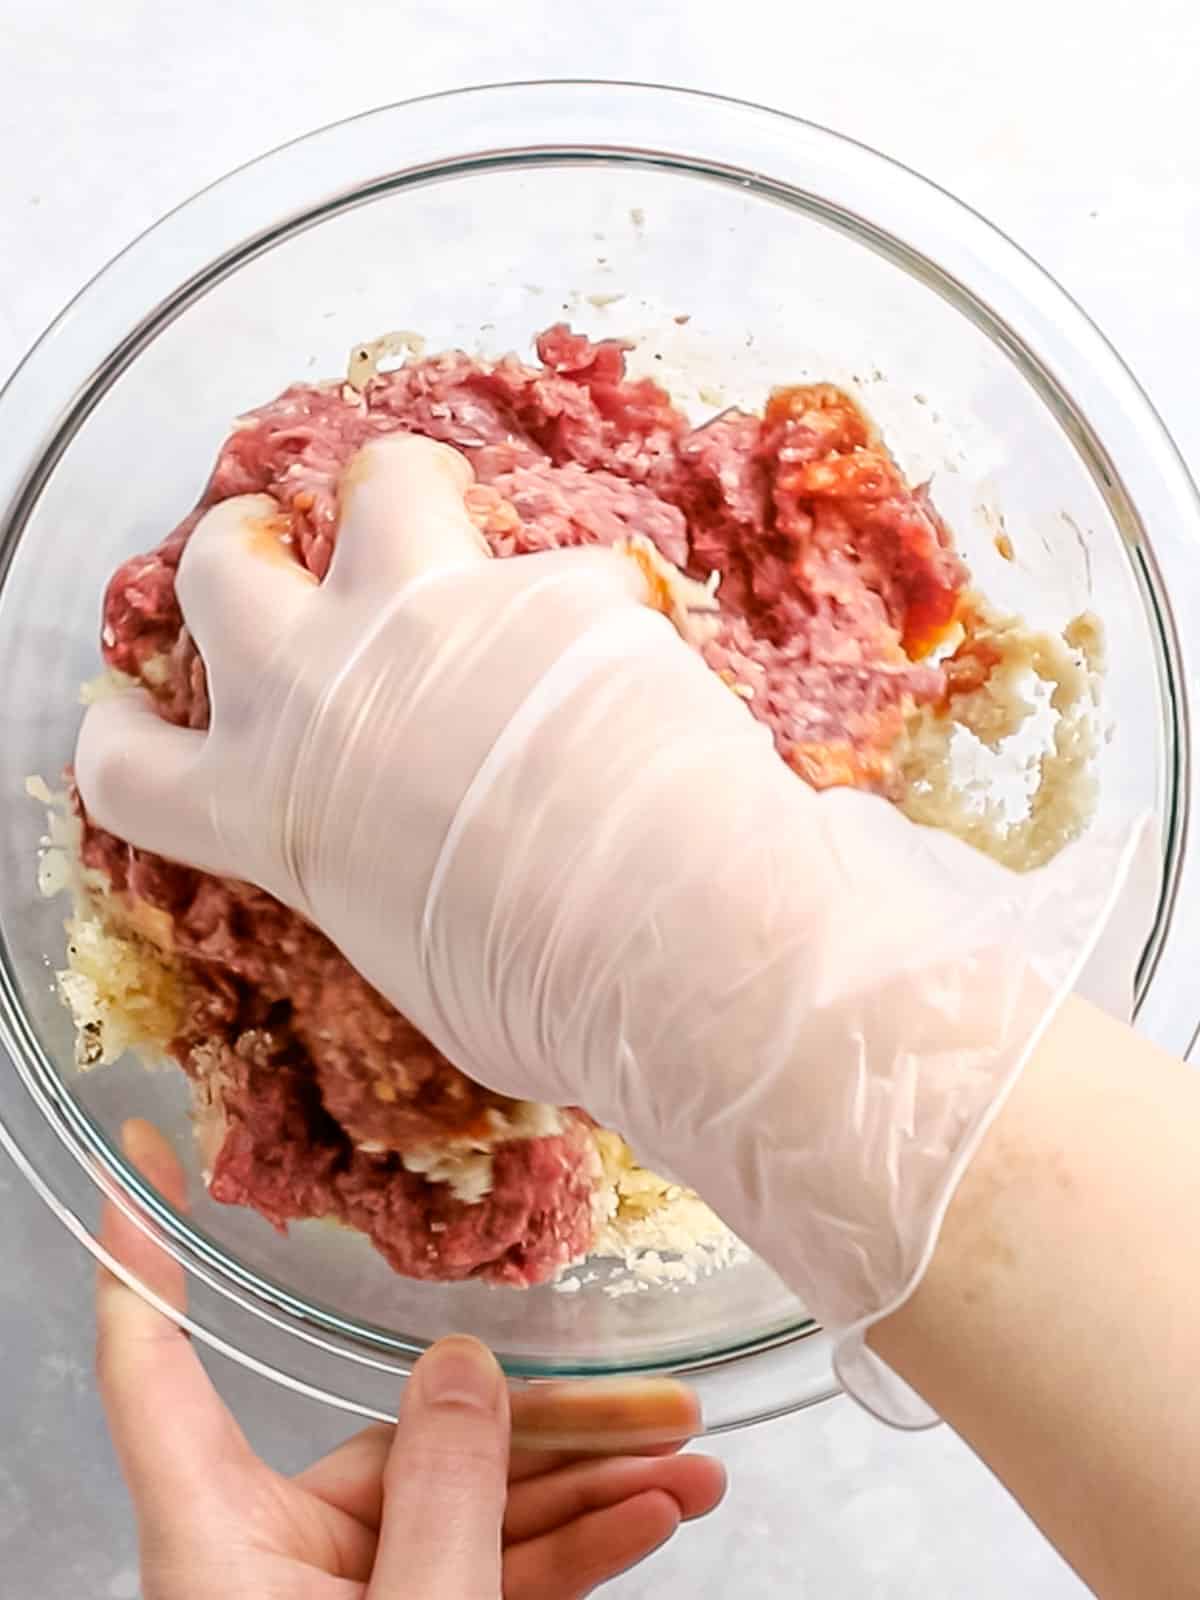 Hamburger steak ingredients in a glass bowl being mixed together with a gloved hand.